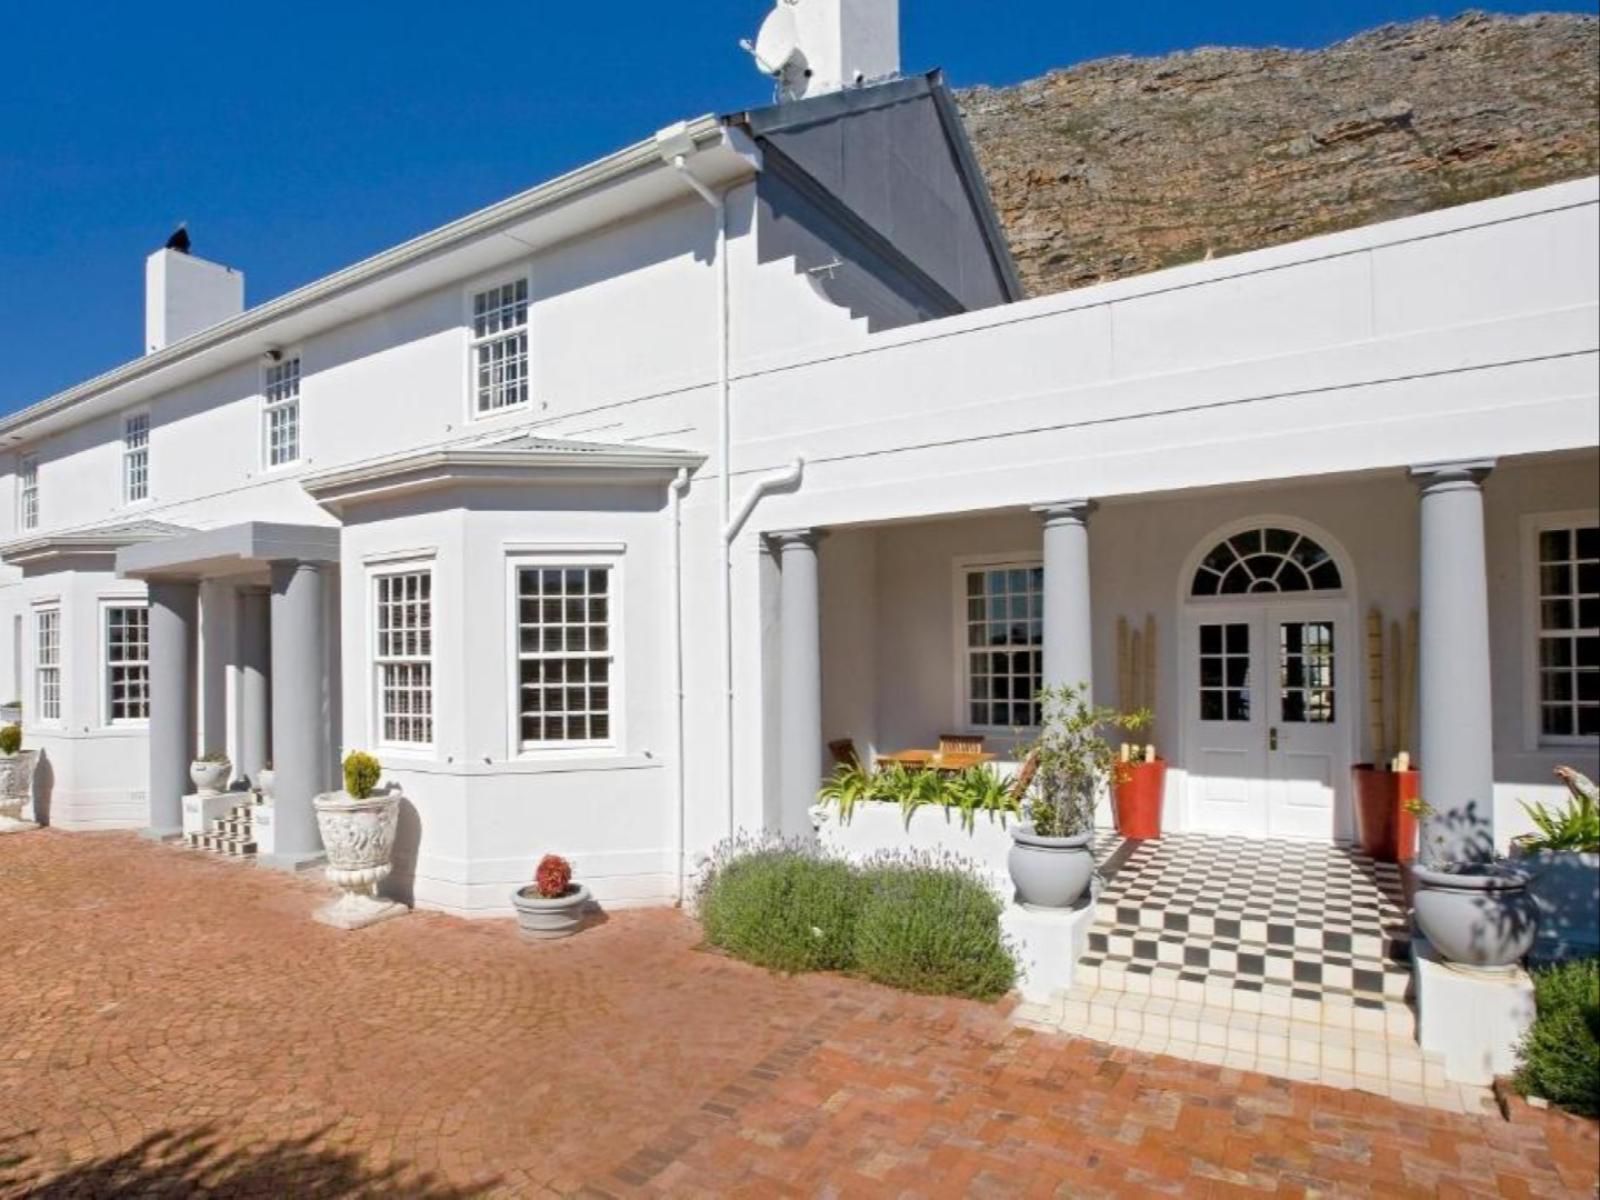 Capeblue Manor House Lakeside Cape Town Western Cape South Africa Building, Architecture, House